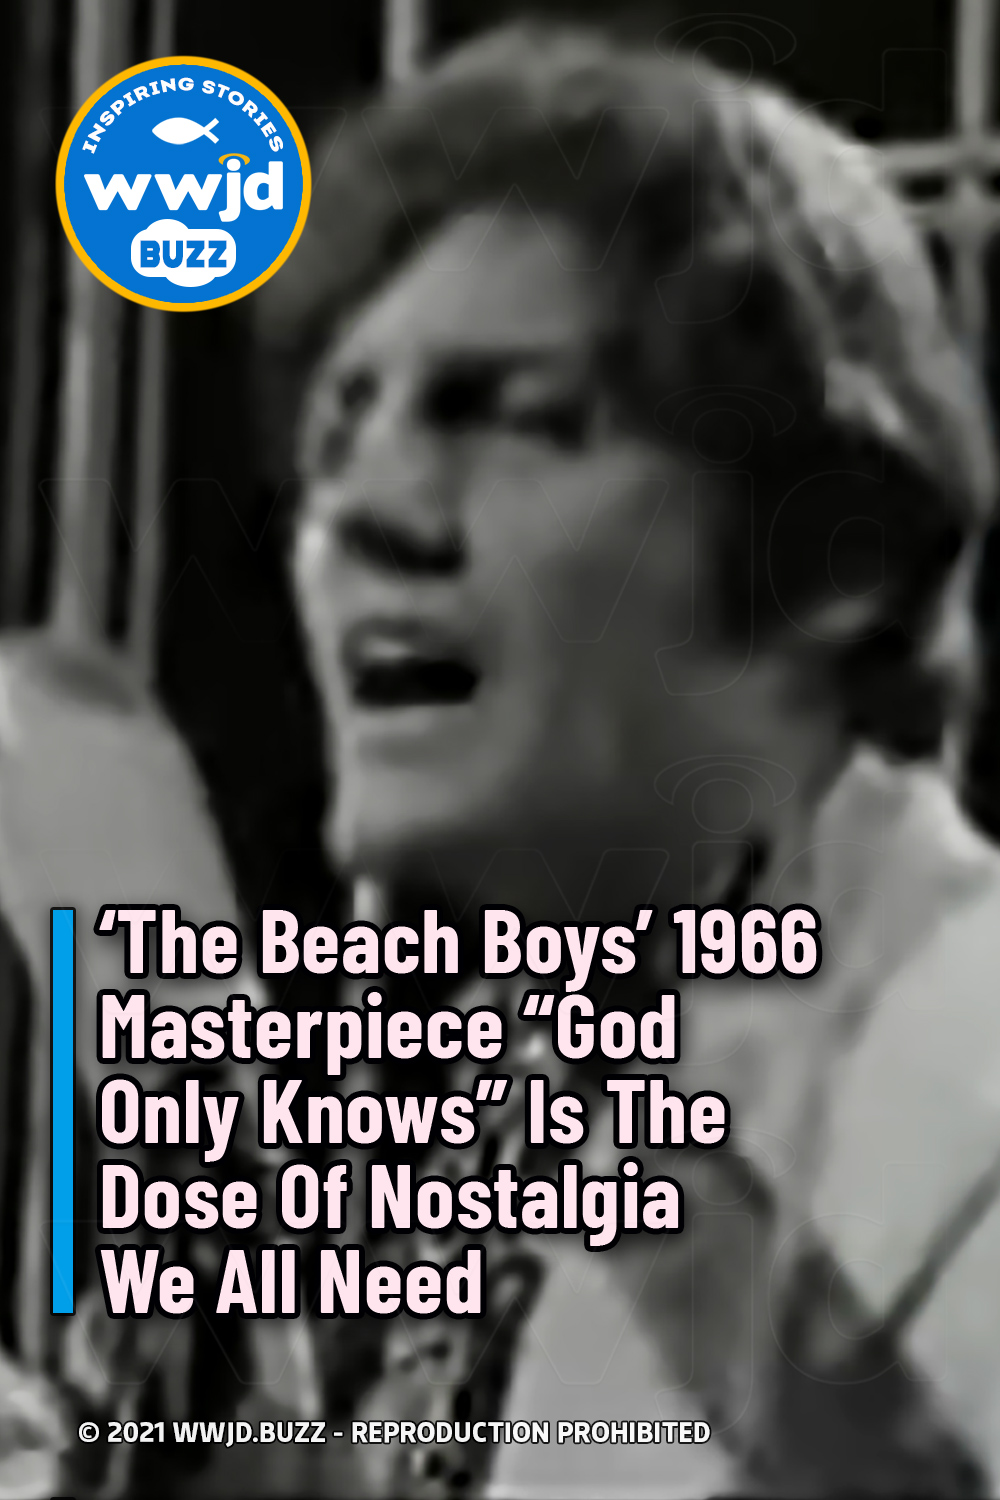 ‘The Beach Boys’ 1966 Masterpiece “God Only Knows” Is The Dose Of Nostalgia We All Need